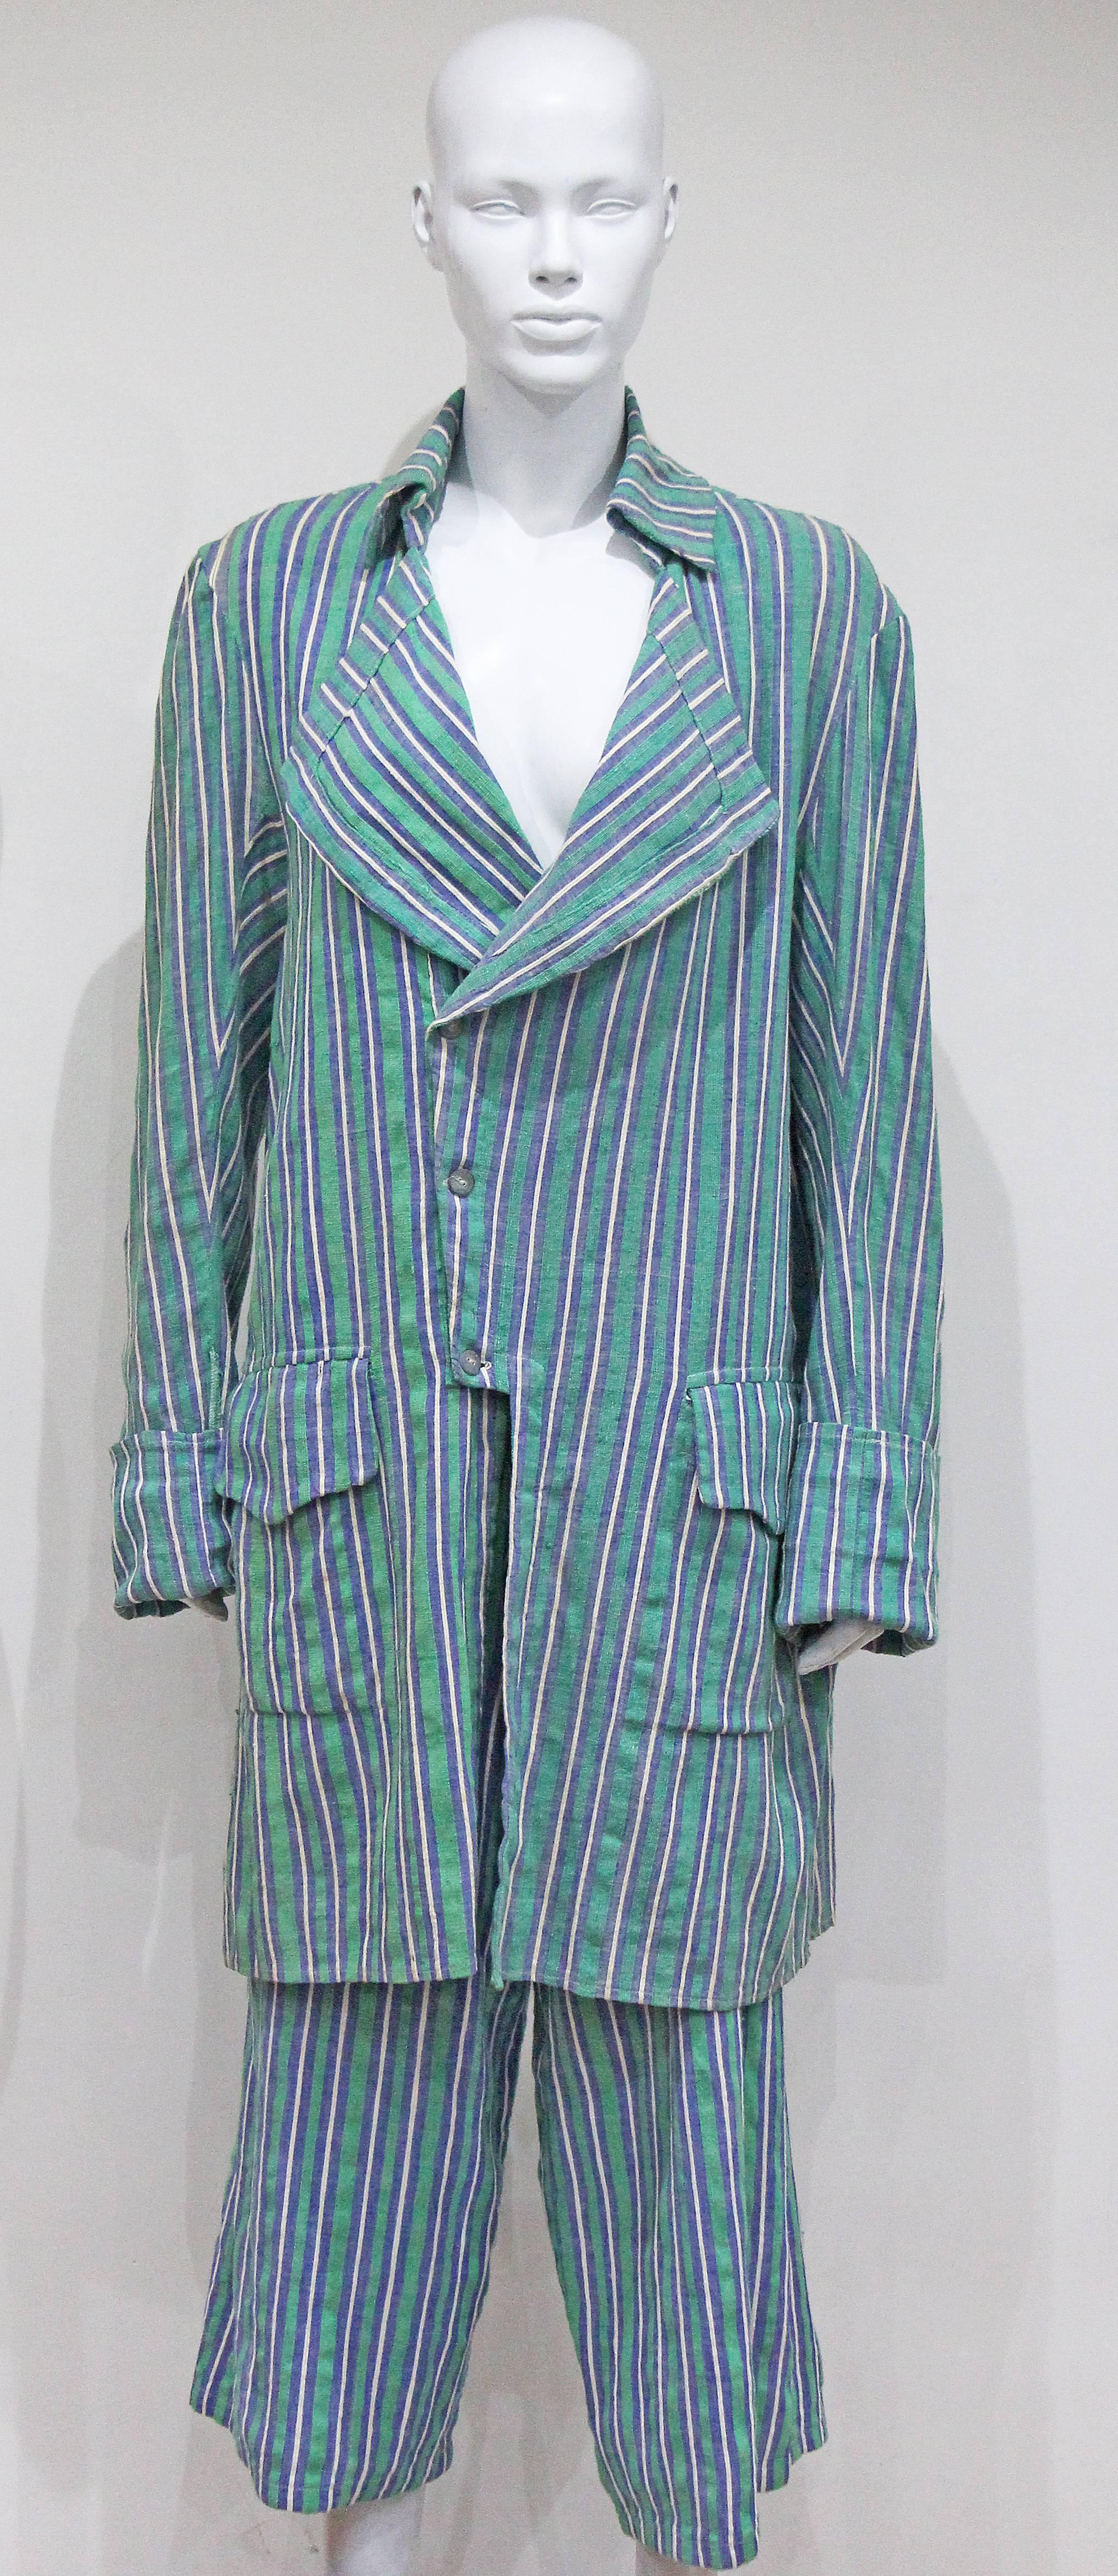 A striped Pirate pant suit by Vivienne Westwood and Malcolm McLaren for there boutique 'World's End'. This comes from McLaren and Westwood's first catwalk show, the Pirate collection (A/W 1981-2). The pant suit is made of a striped heavy cotton in